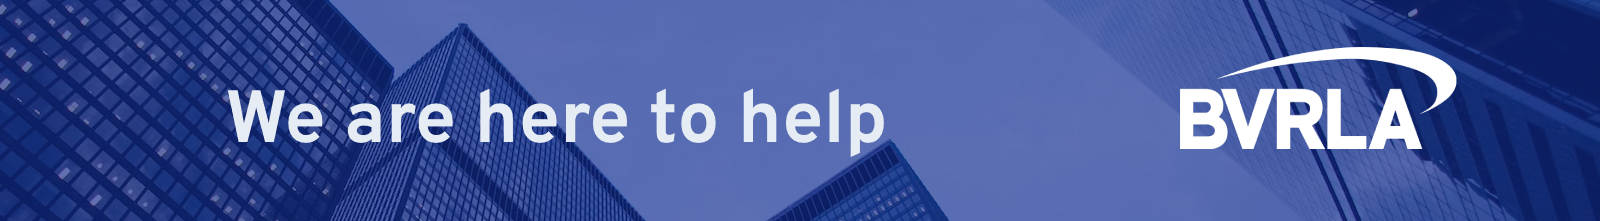 We are here to help banner.png